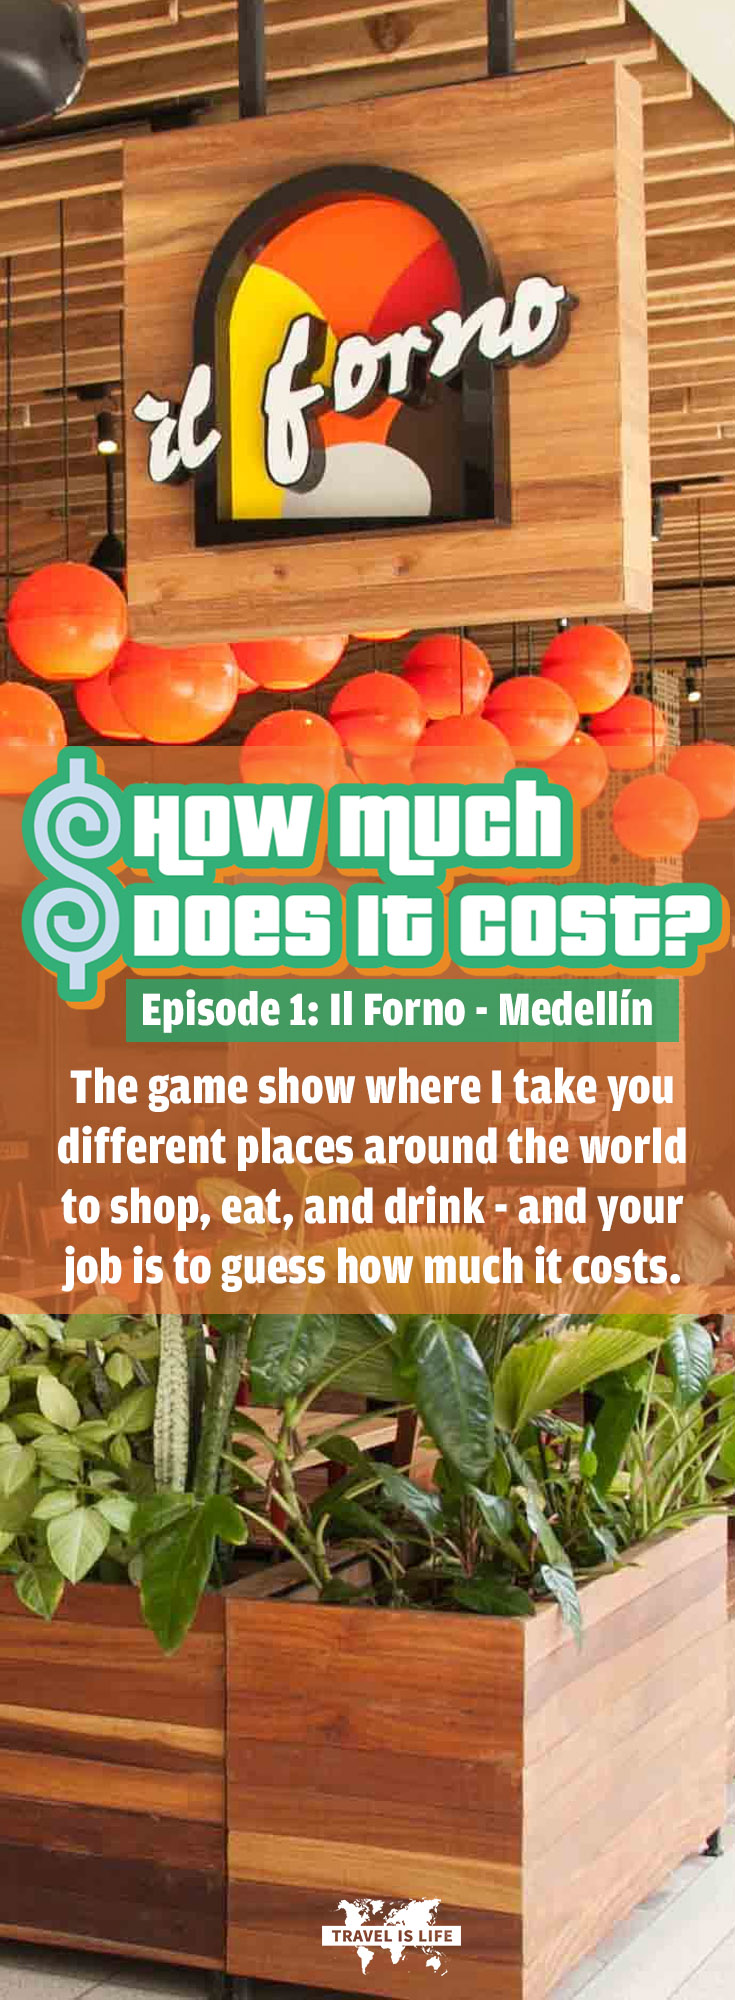 How Much Does It Cost - Episode 1 - Italian Restaurant  - Medellin Colombia